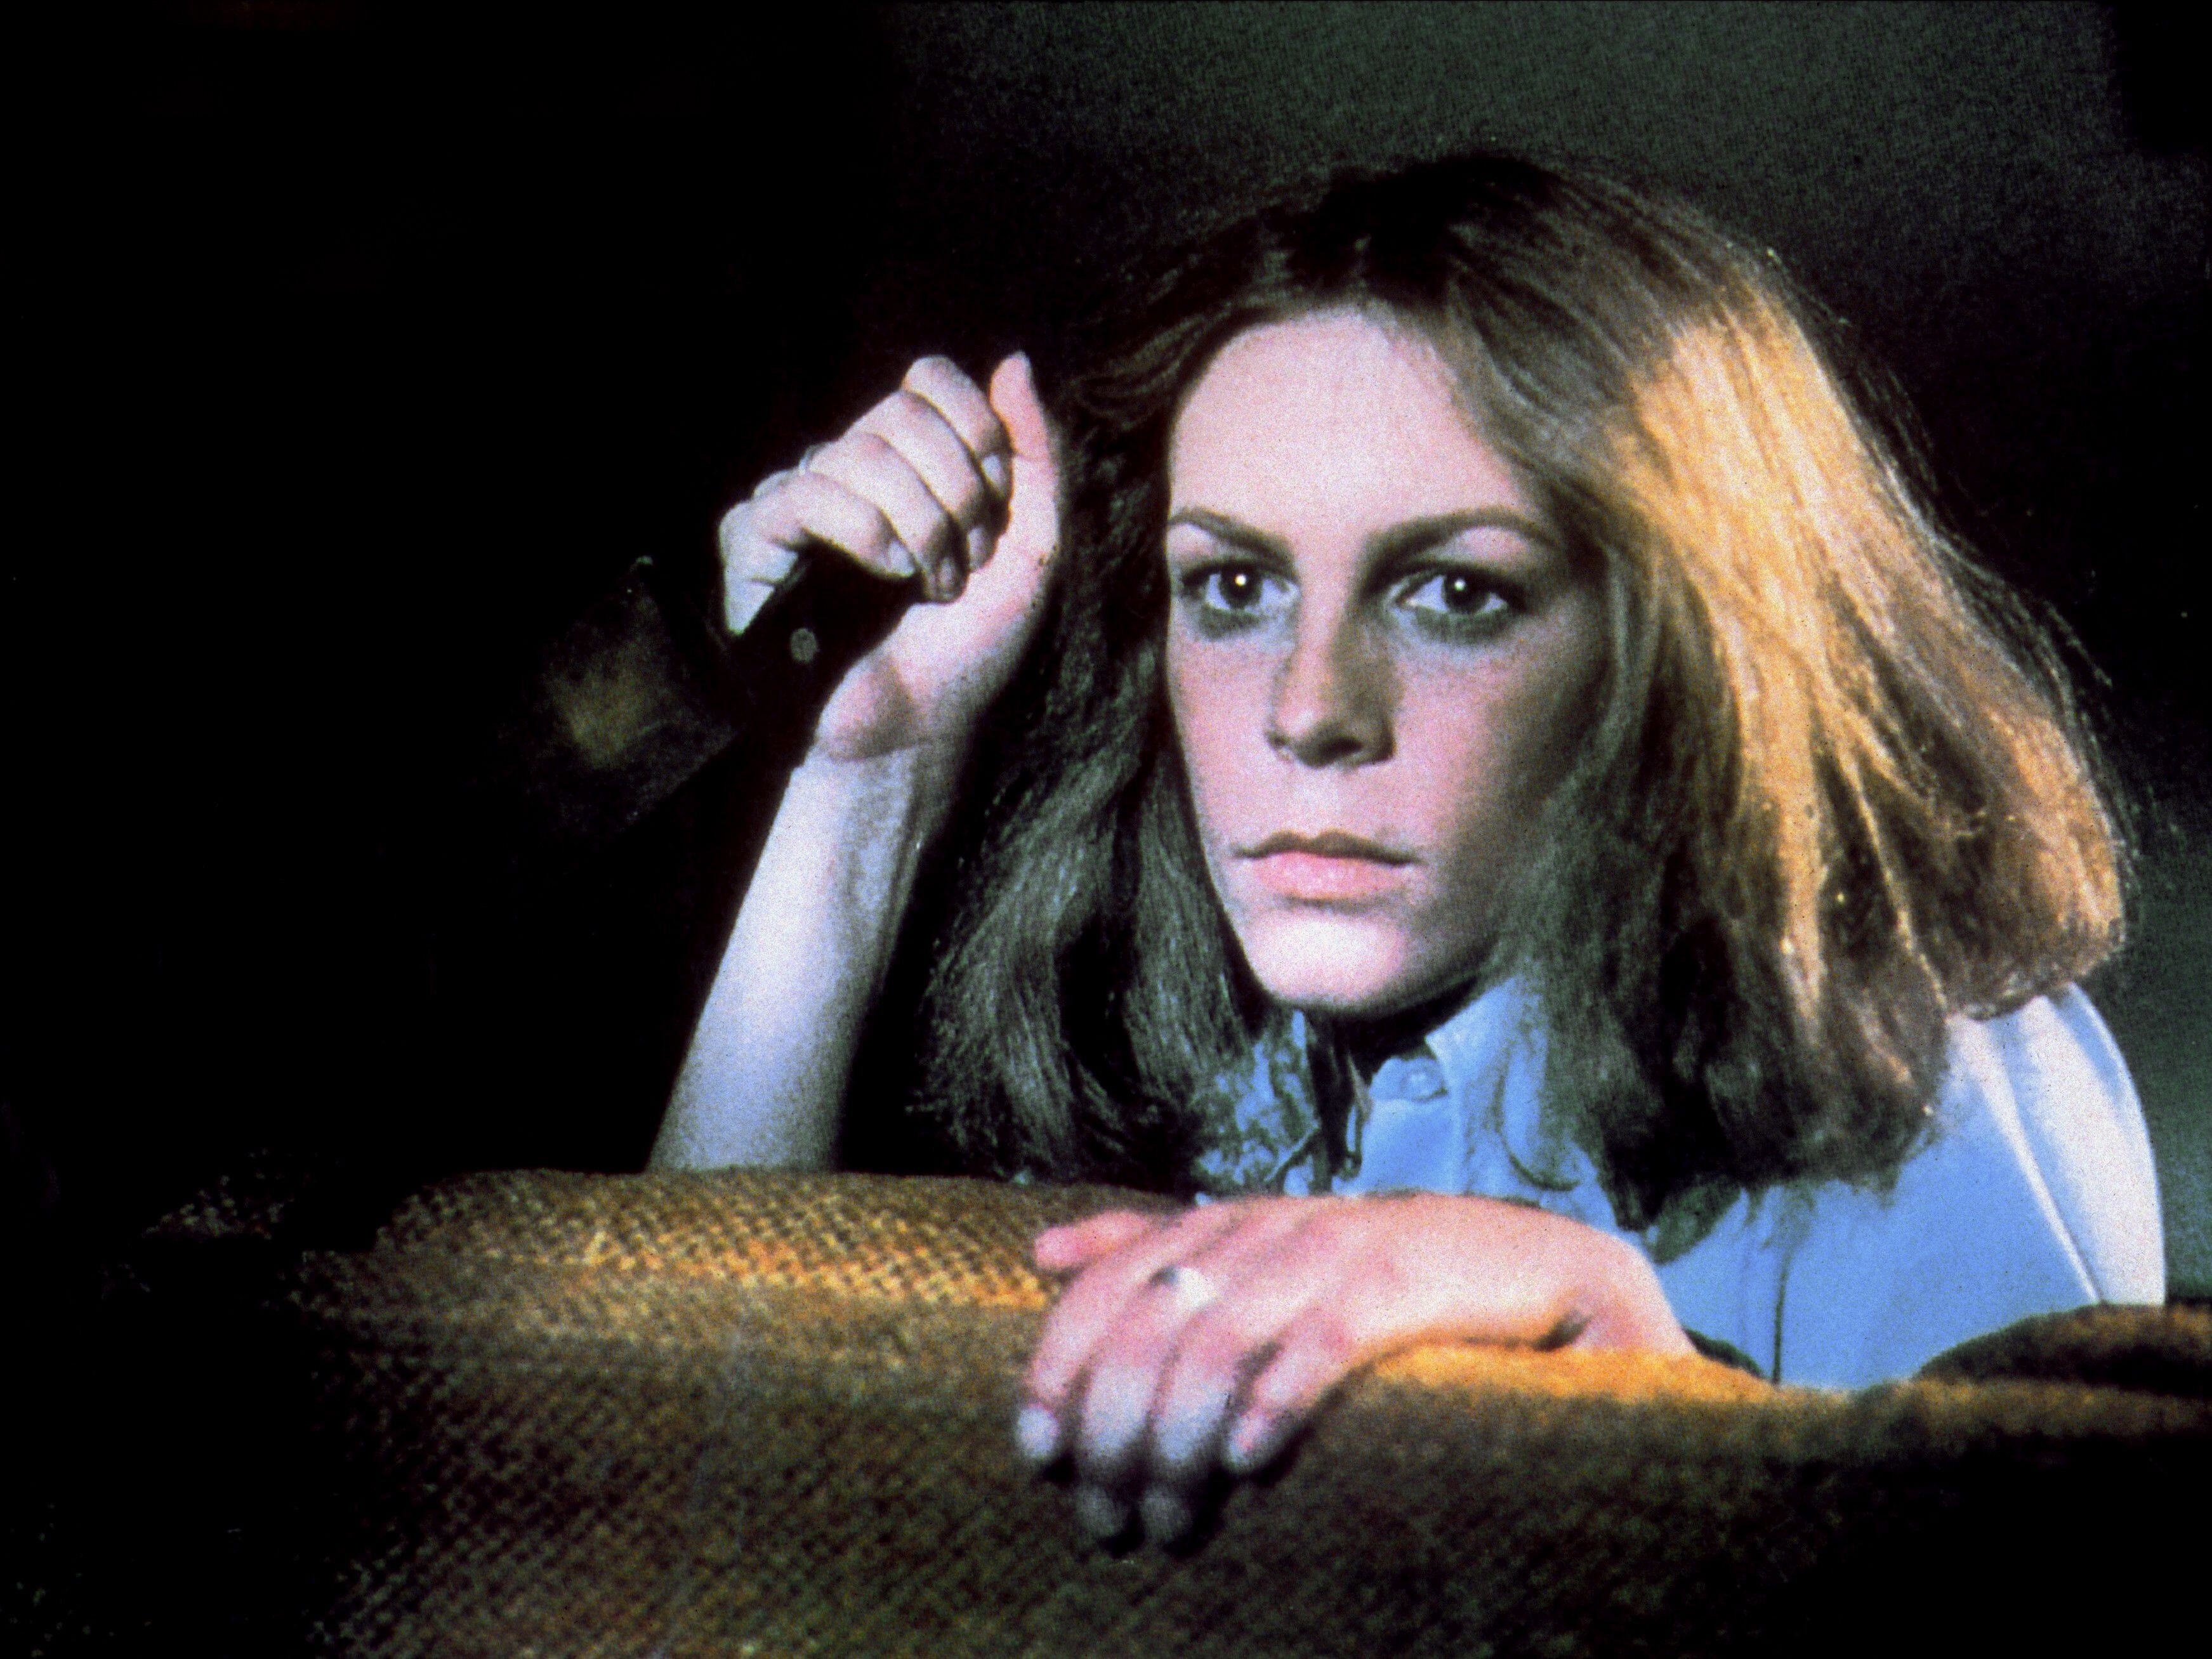 Jamie Lee Curtis holding a knife in Halloween